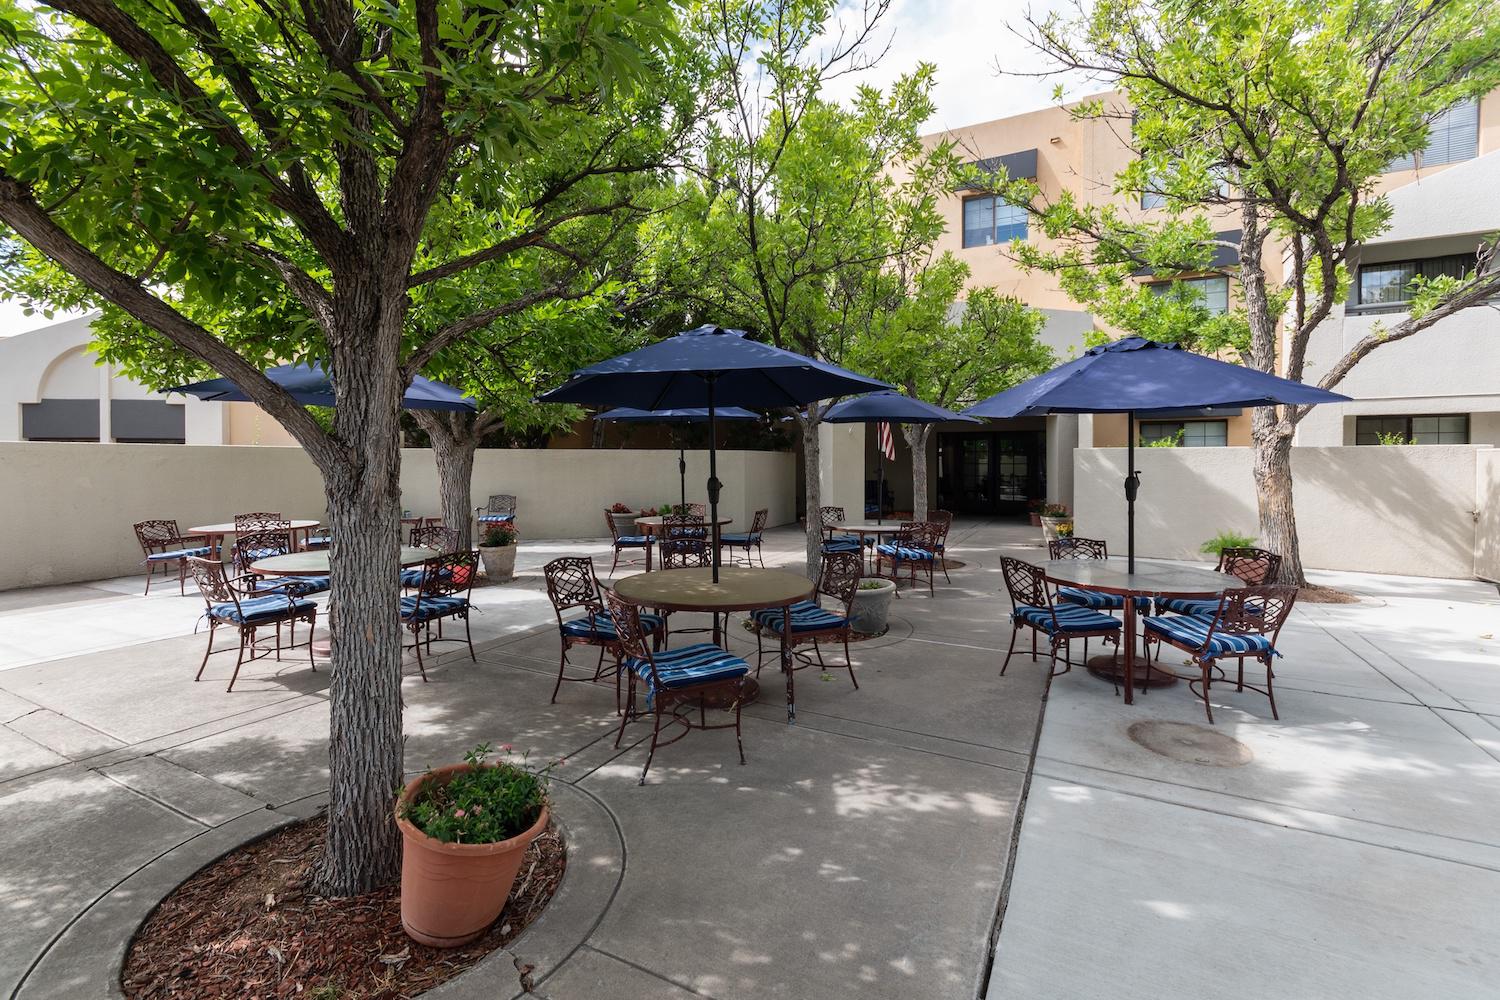 The Montebello on Academy courtyard with tables and chairs